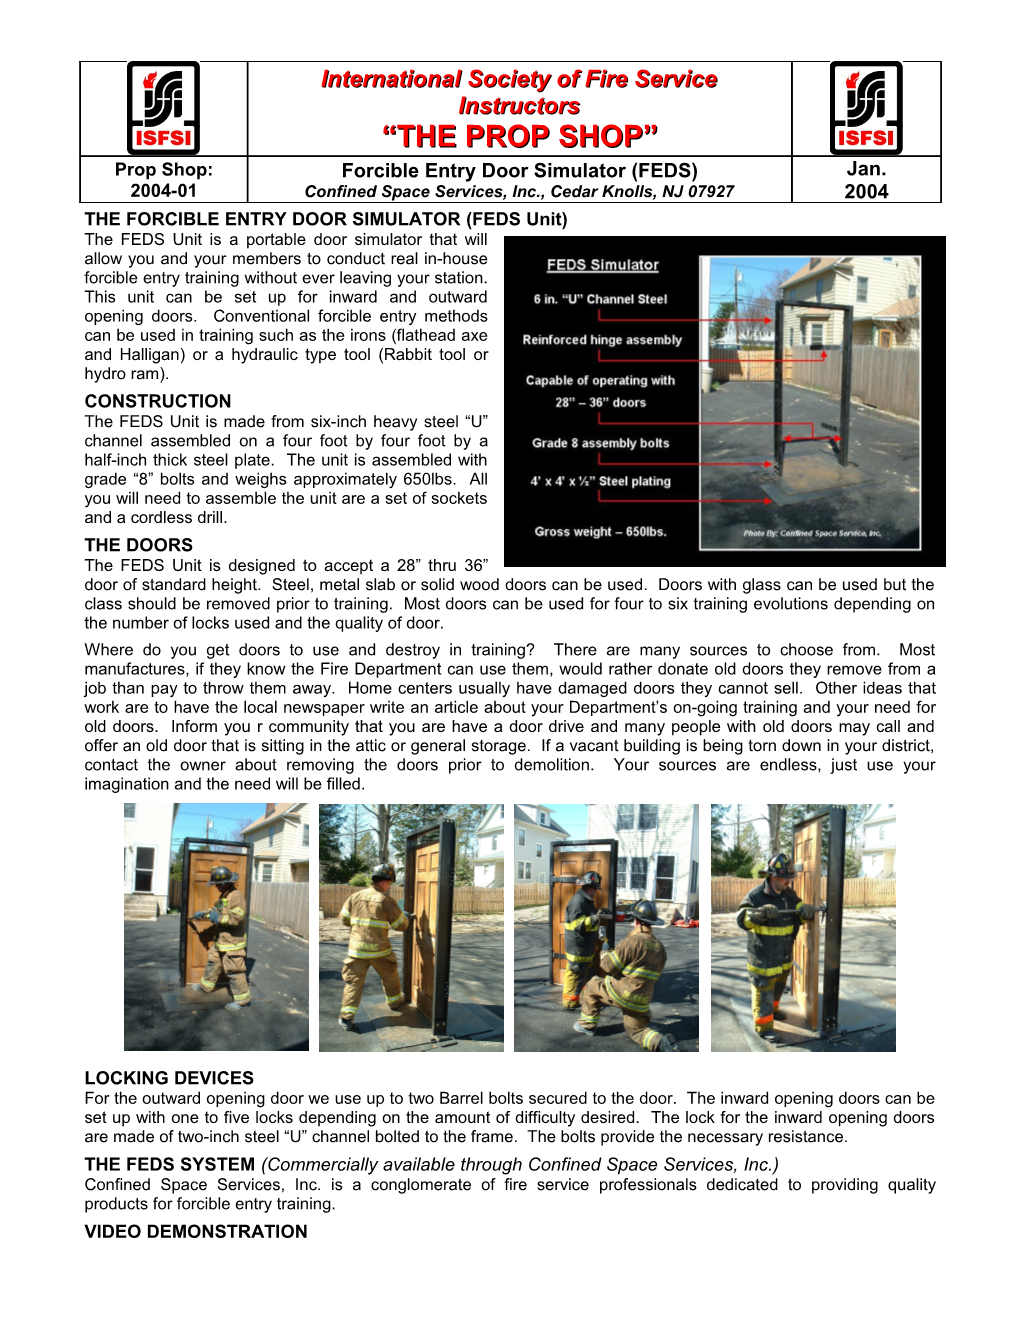 Firefighter Survival Training Firefighters Who Have Been Properly Trained in Self-Survival